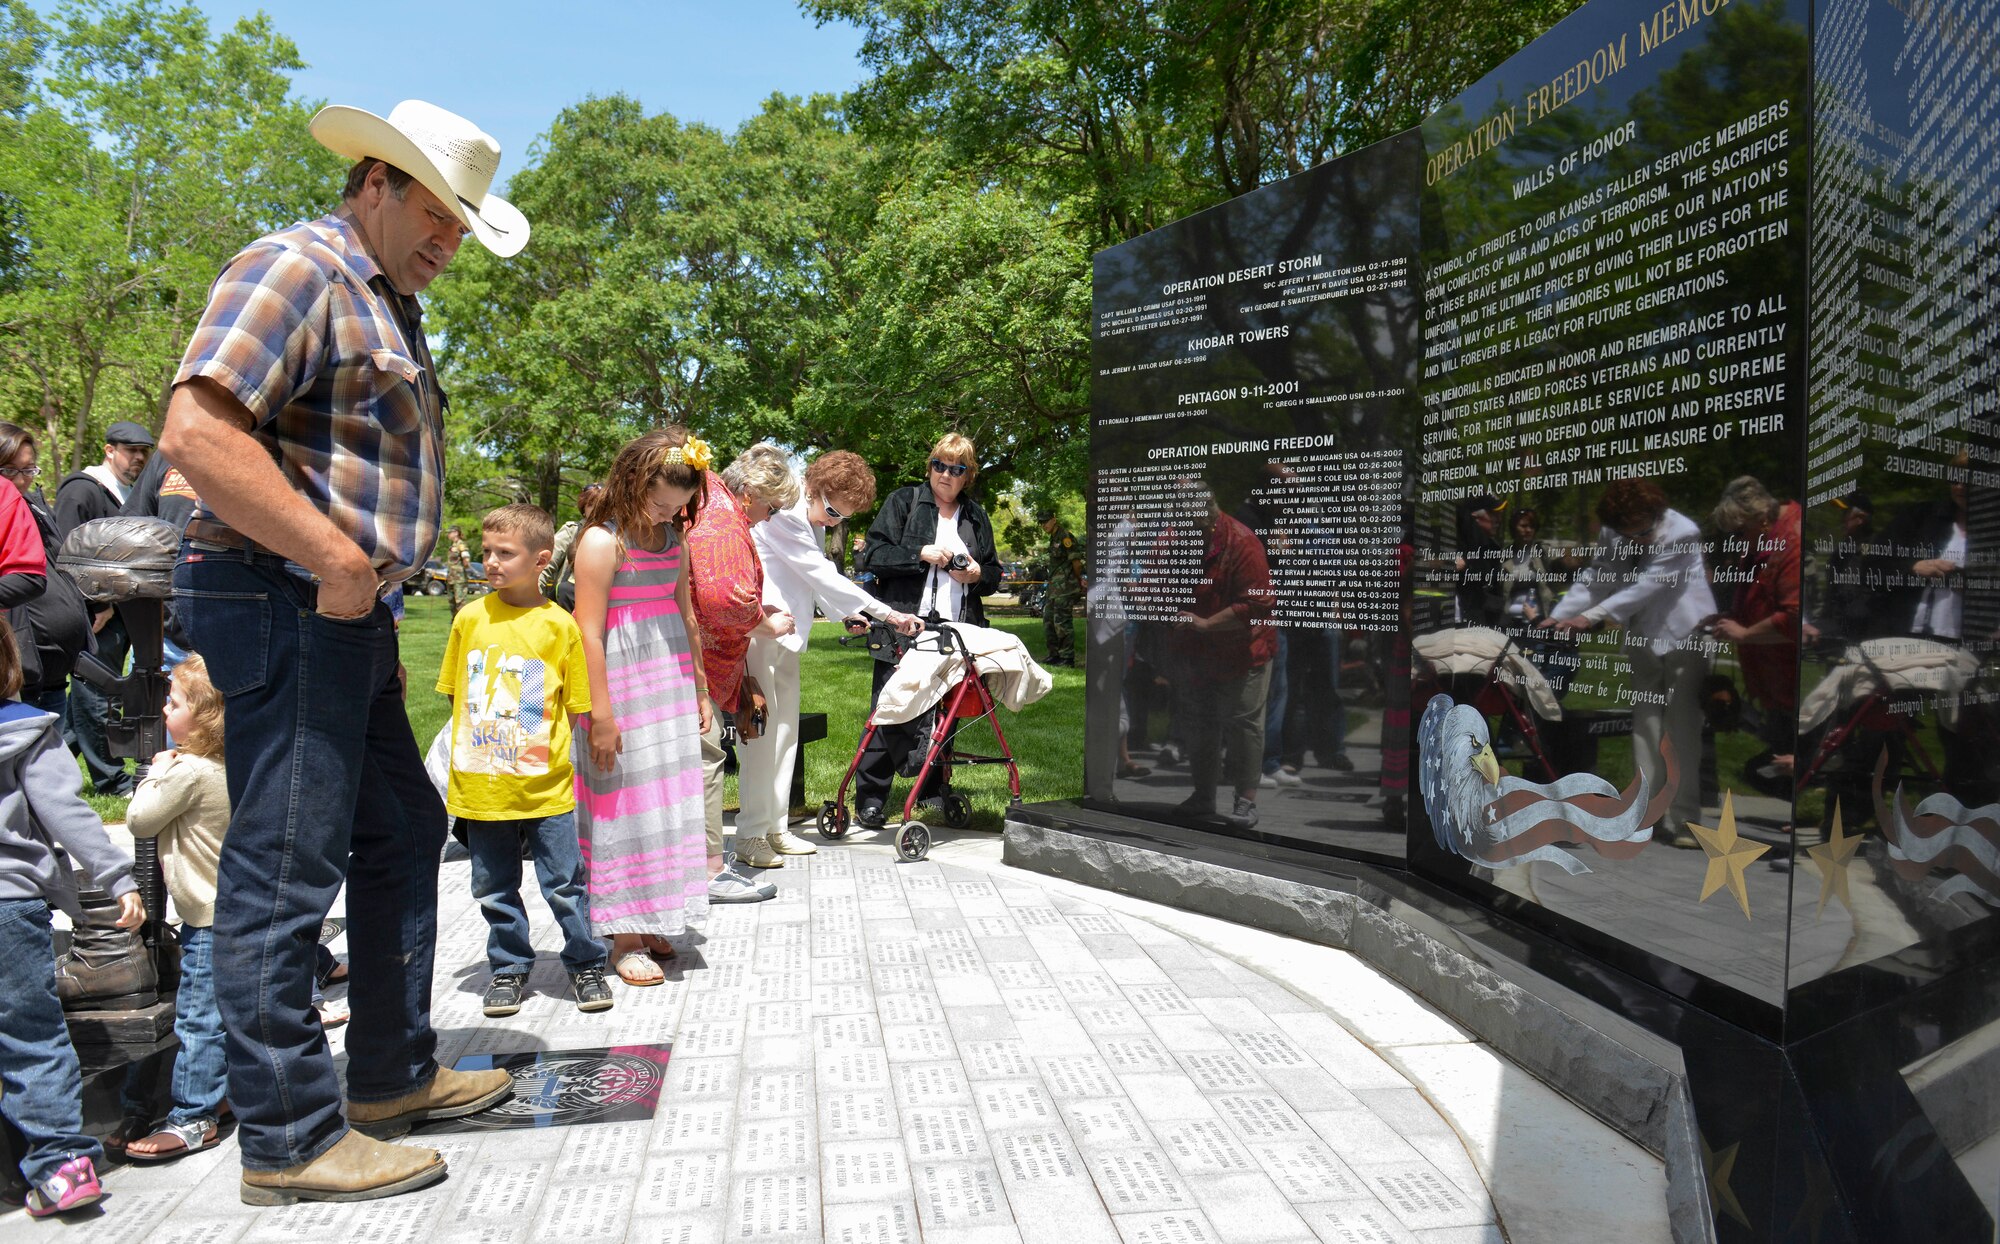 Visitors observe the Operation Freedom Memorial during a dedication ceremony, at the Veteran’s Memorial Park, May 17, 2014, in Wichita, Kansas. The OFM foundation, lead by Kansas Gold Star mother, Anita Dixon, and local contributors and donators helped build the memorial to recognize Kansas service members who have paid the ultimate sacrifice. (U.S. Air Force photo/Staff Sgt. Jess Lockoski)